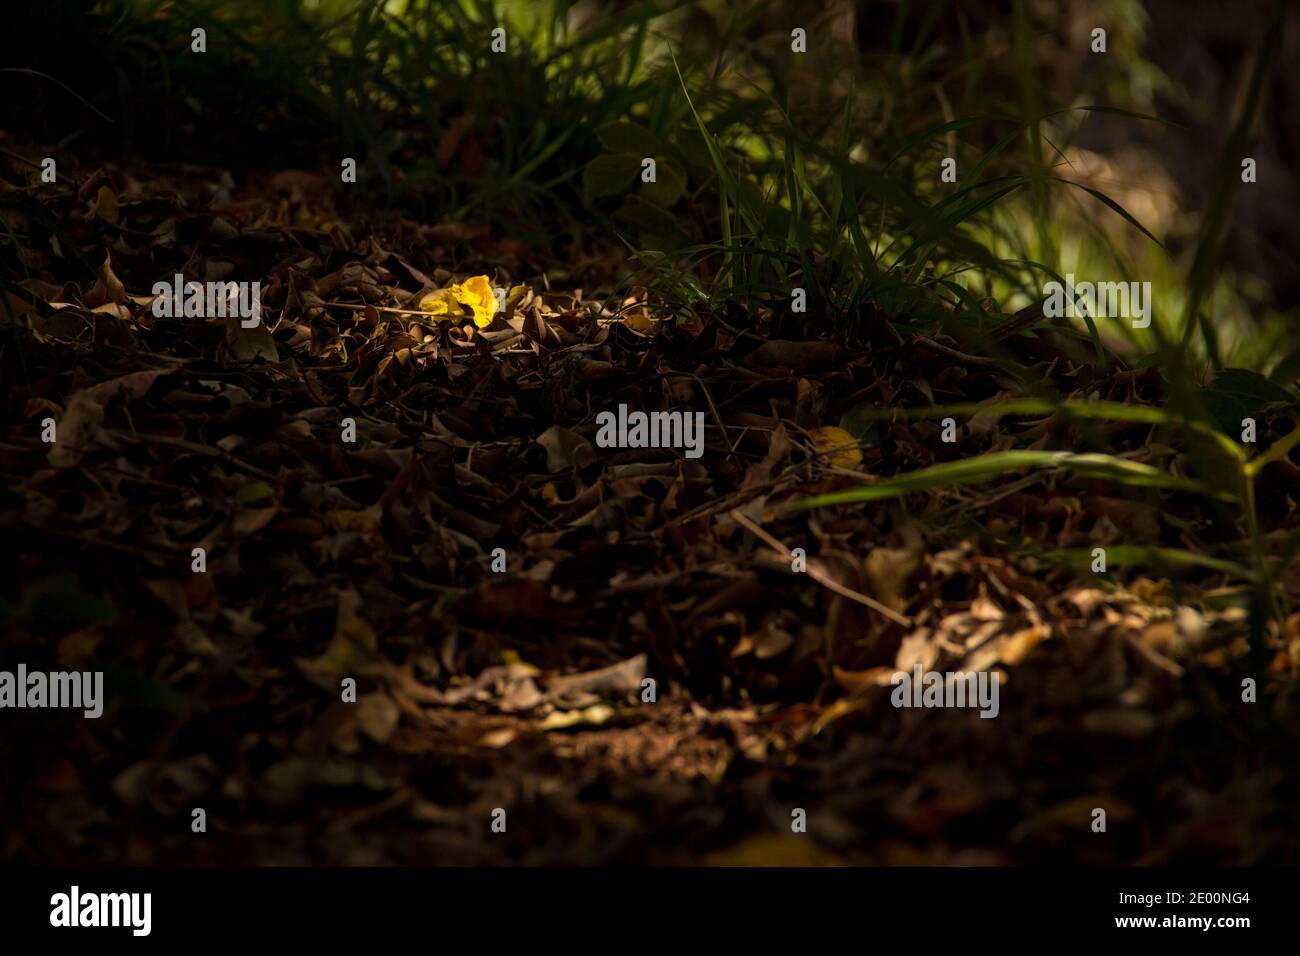 Yellow flower bathed by the sunlight in a forest over dead brow leaves in the shadows Stock Photo